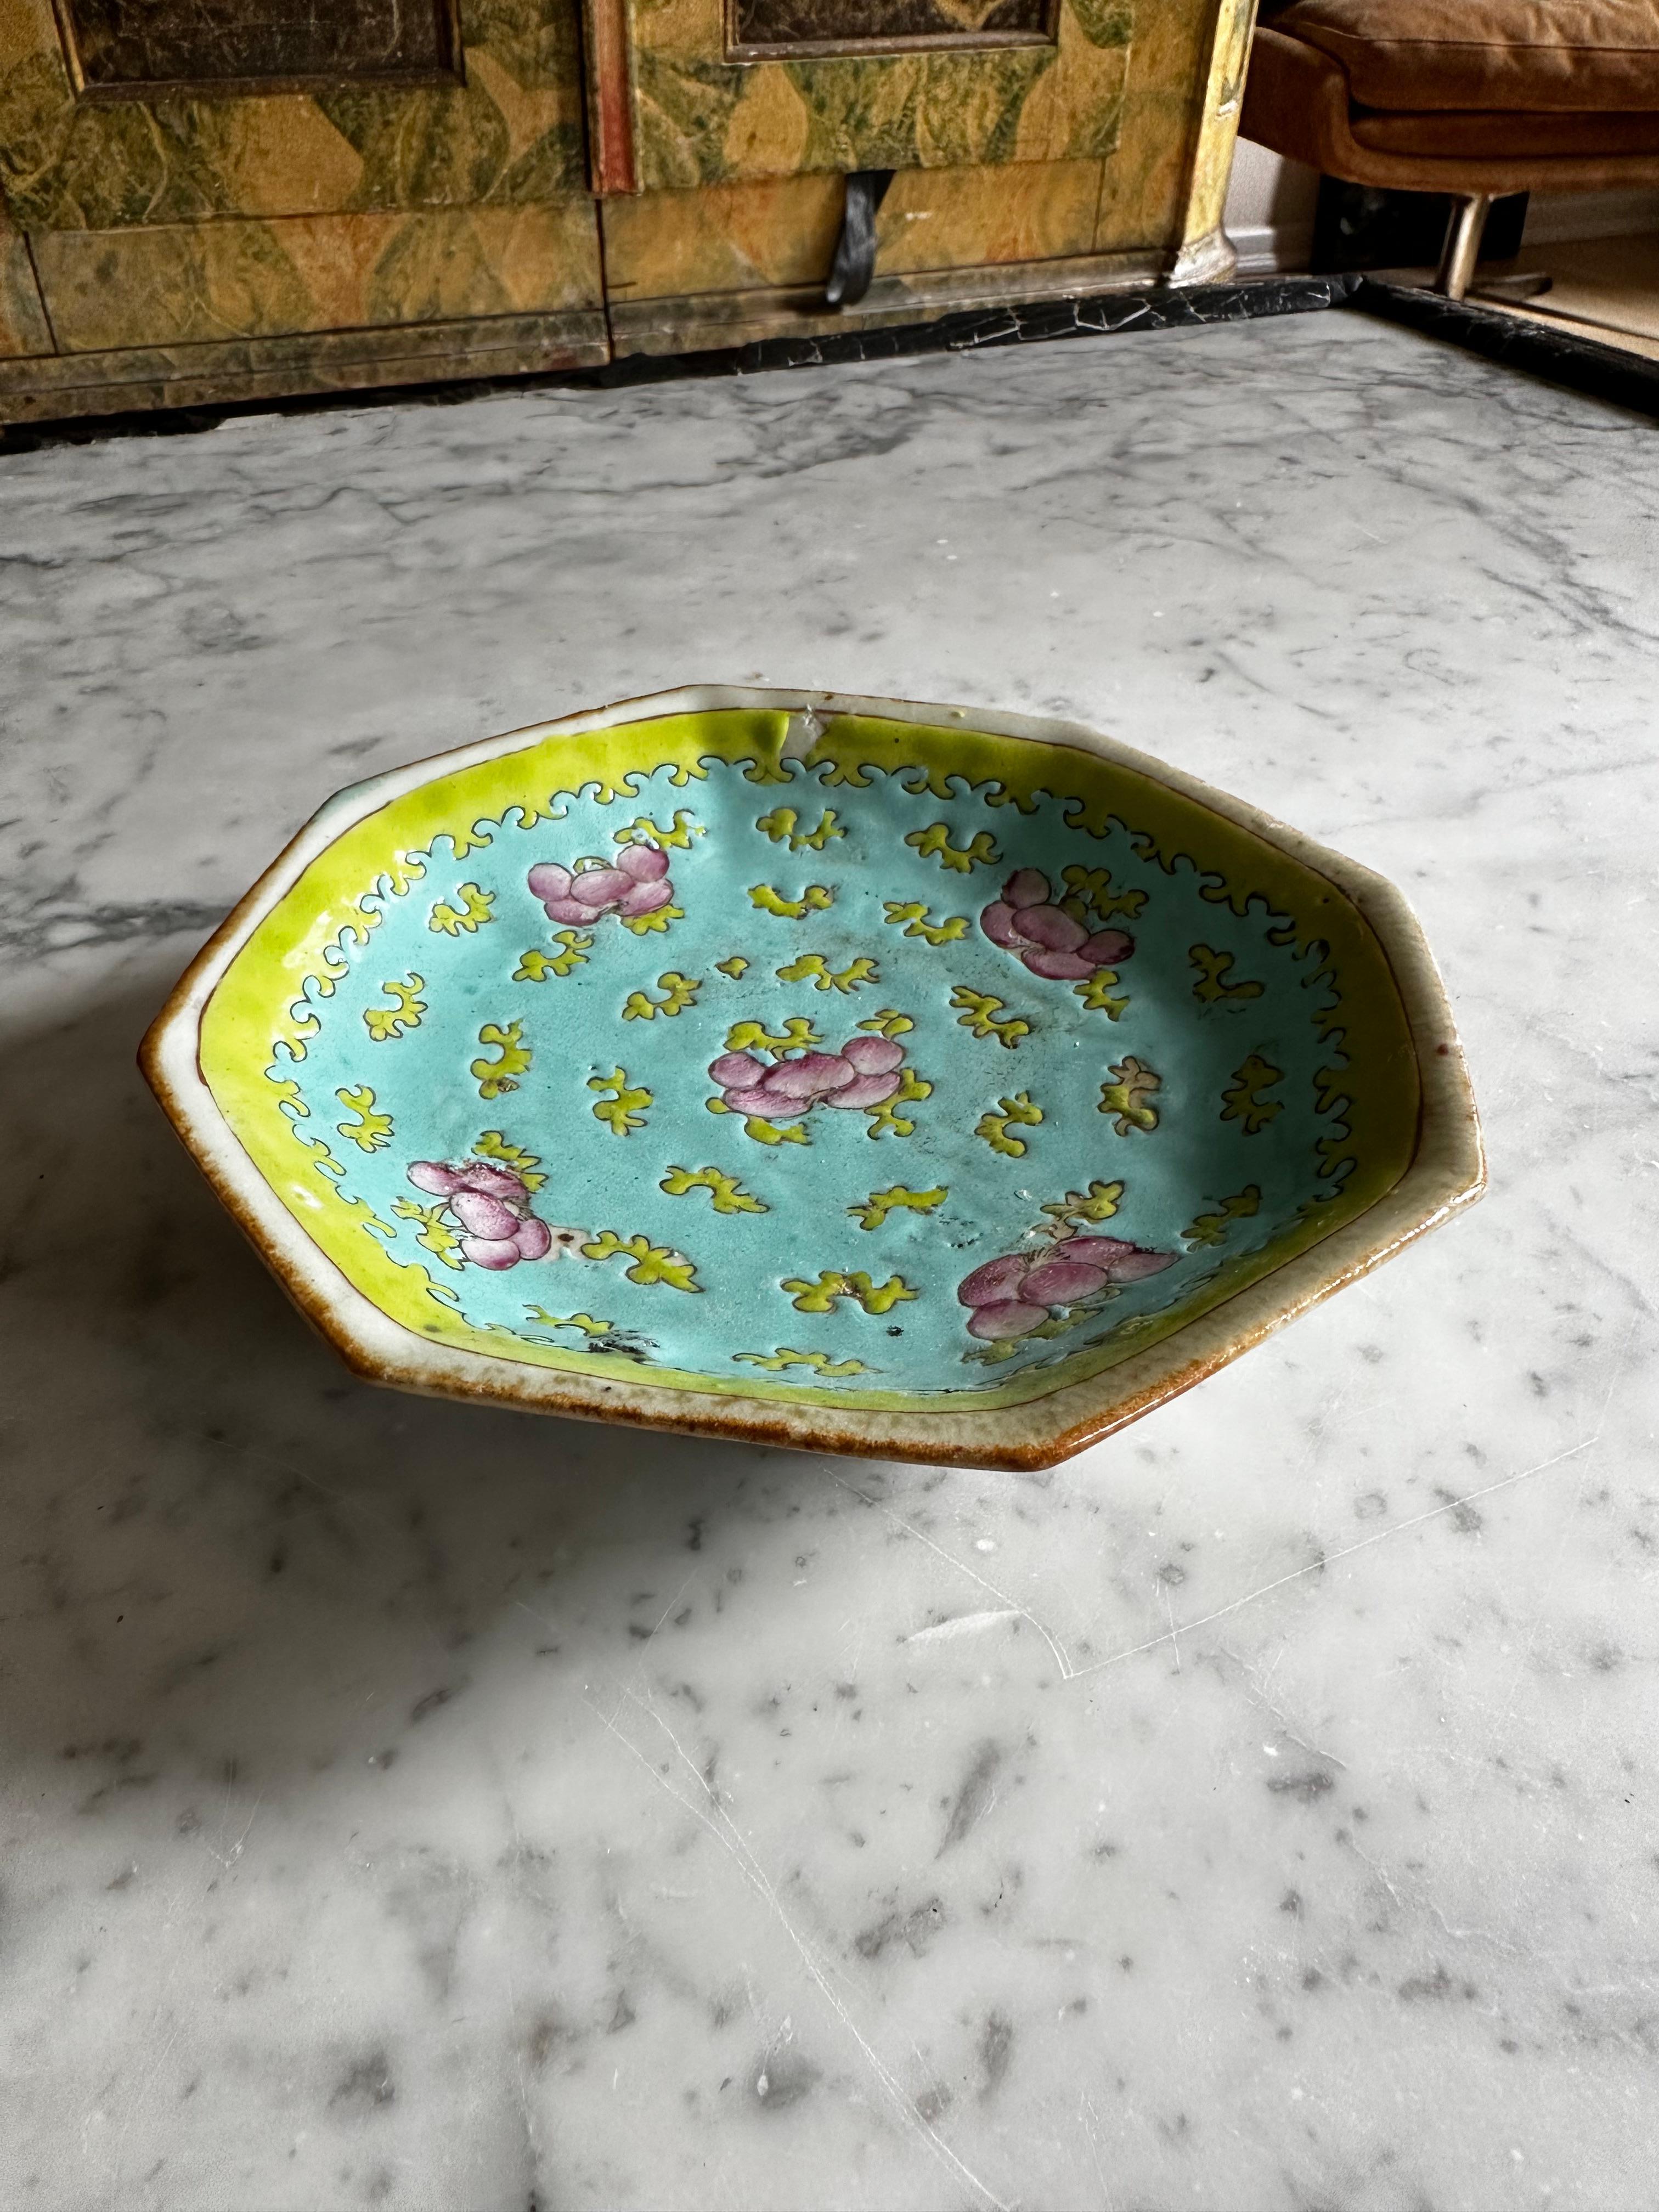 Presenting a magnificent piece of Chinese craftsmanship, this Turquoise Bowl hails from the late Qing Dynasty. This rectangular-shaped beauty is a testament to the artistry and attention to detail that defined this period.

The bowl's underside